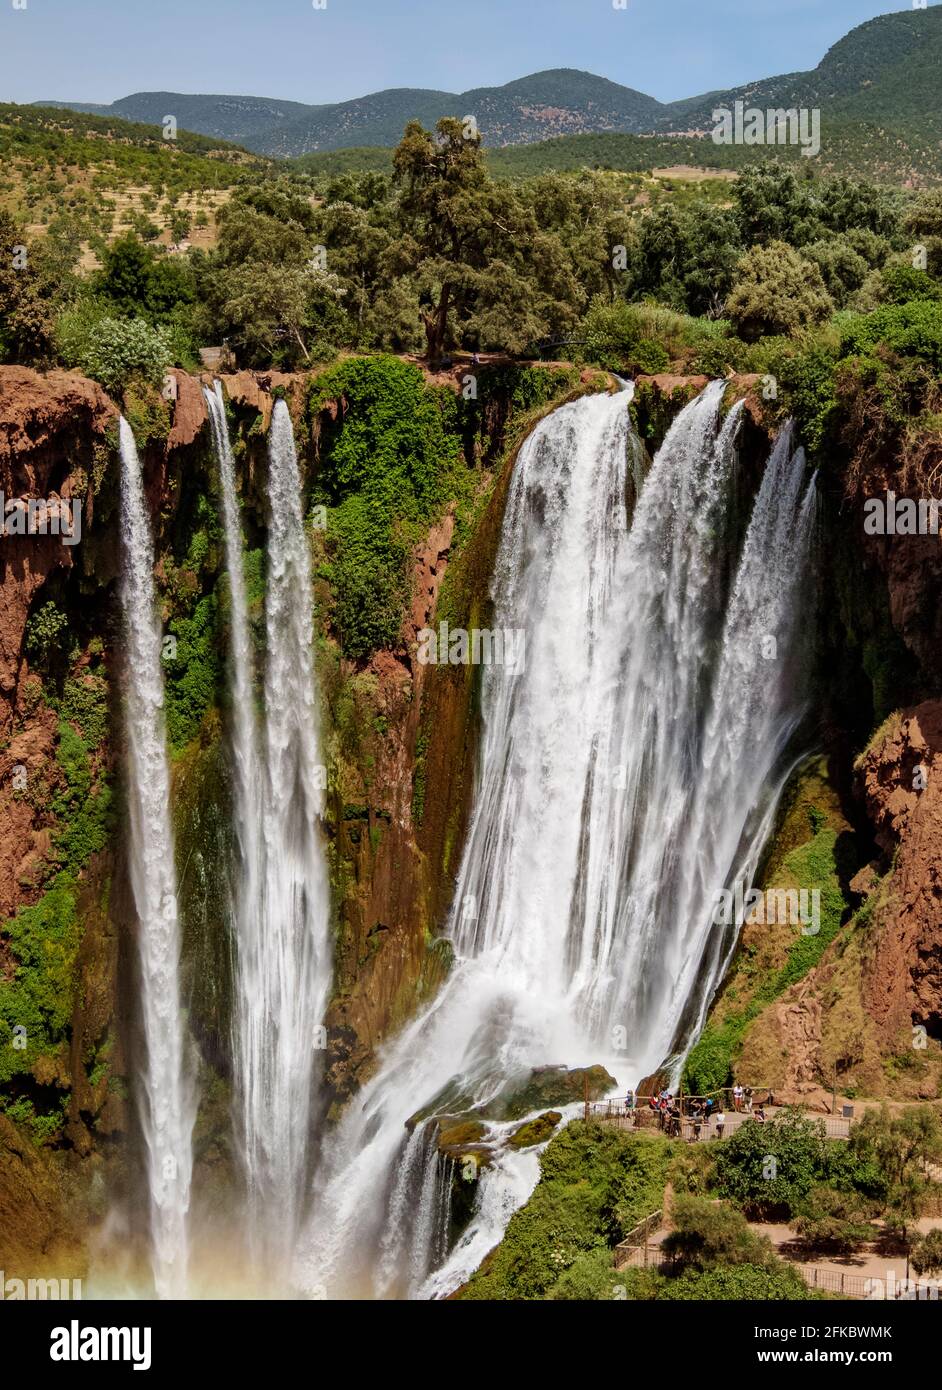 Ouzoud Falls, waterfall near the Middle Atlas village of Tanaghmeilt, Azilal Province, Beni Mellal-Khenifra Region, Morocco, North Africa, Africa Stock Photo